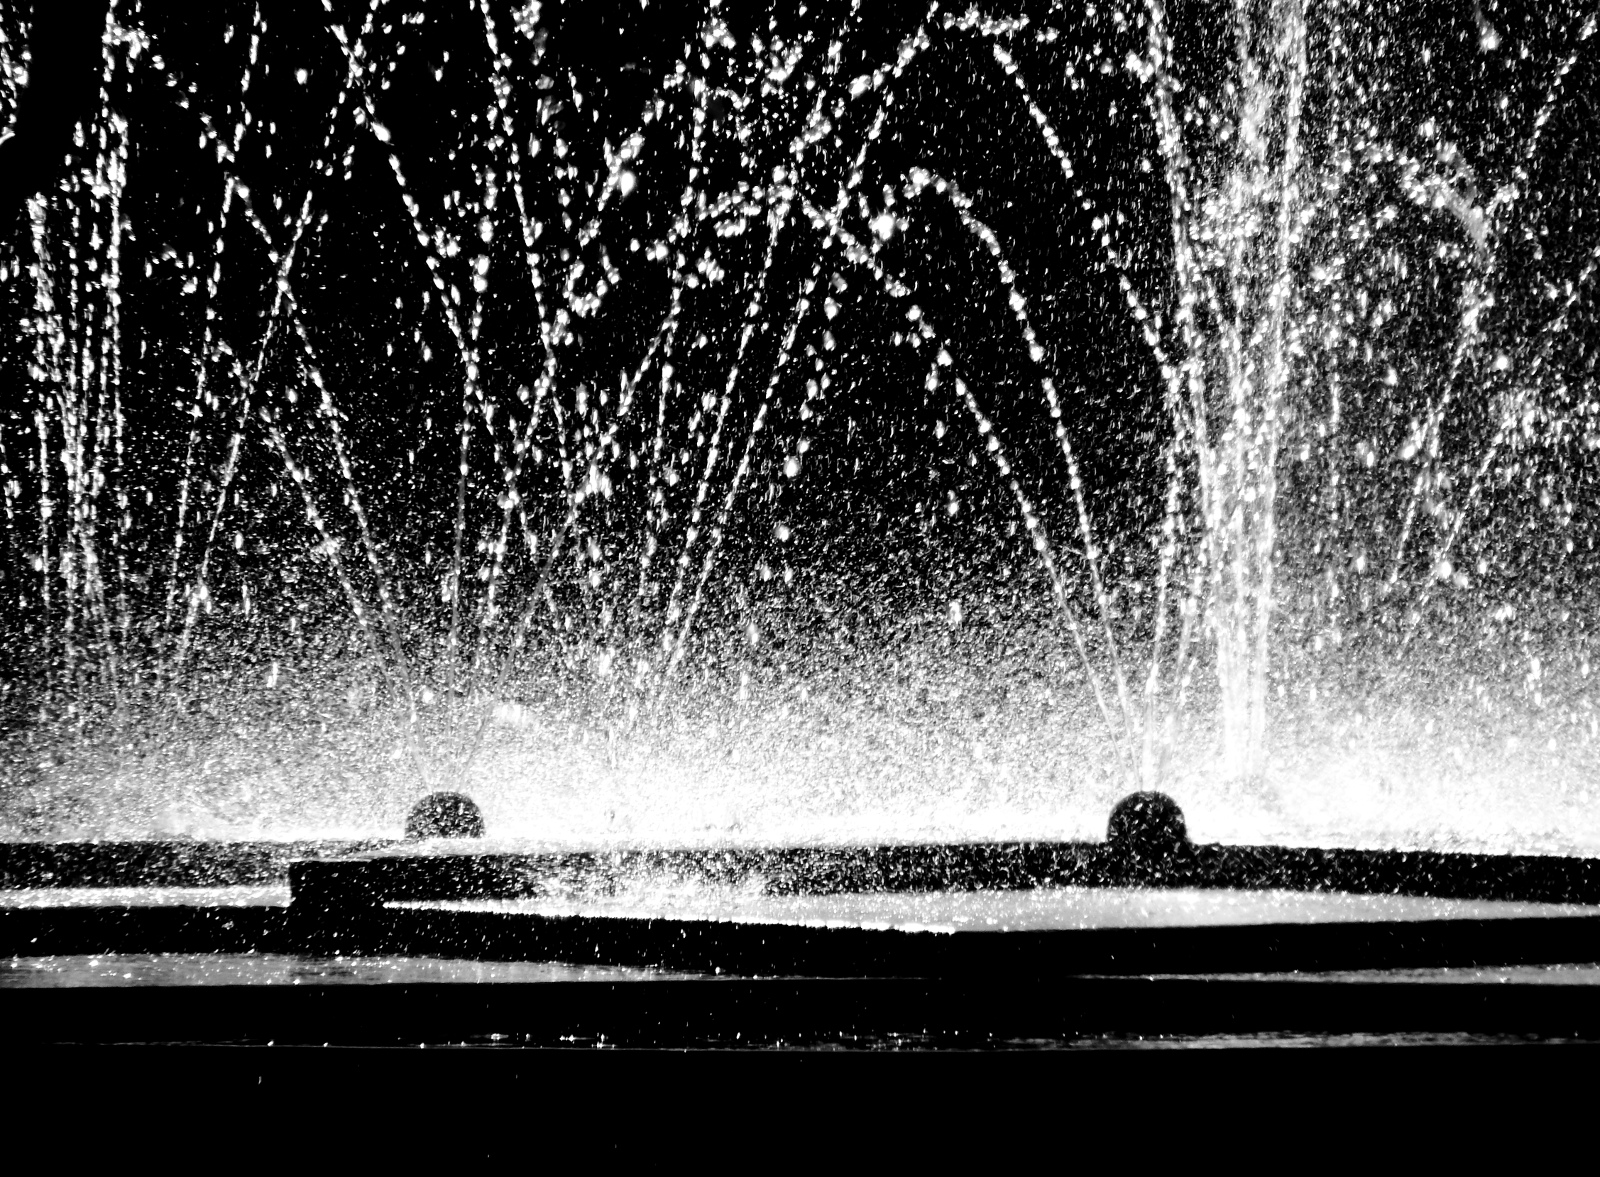 a black and white image of fireworks shooting in the sky